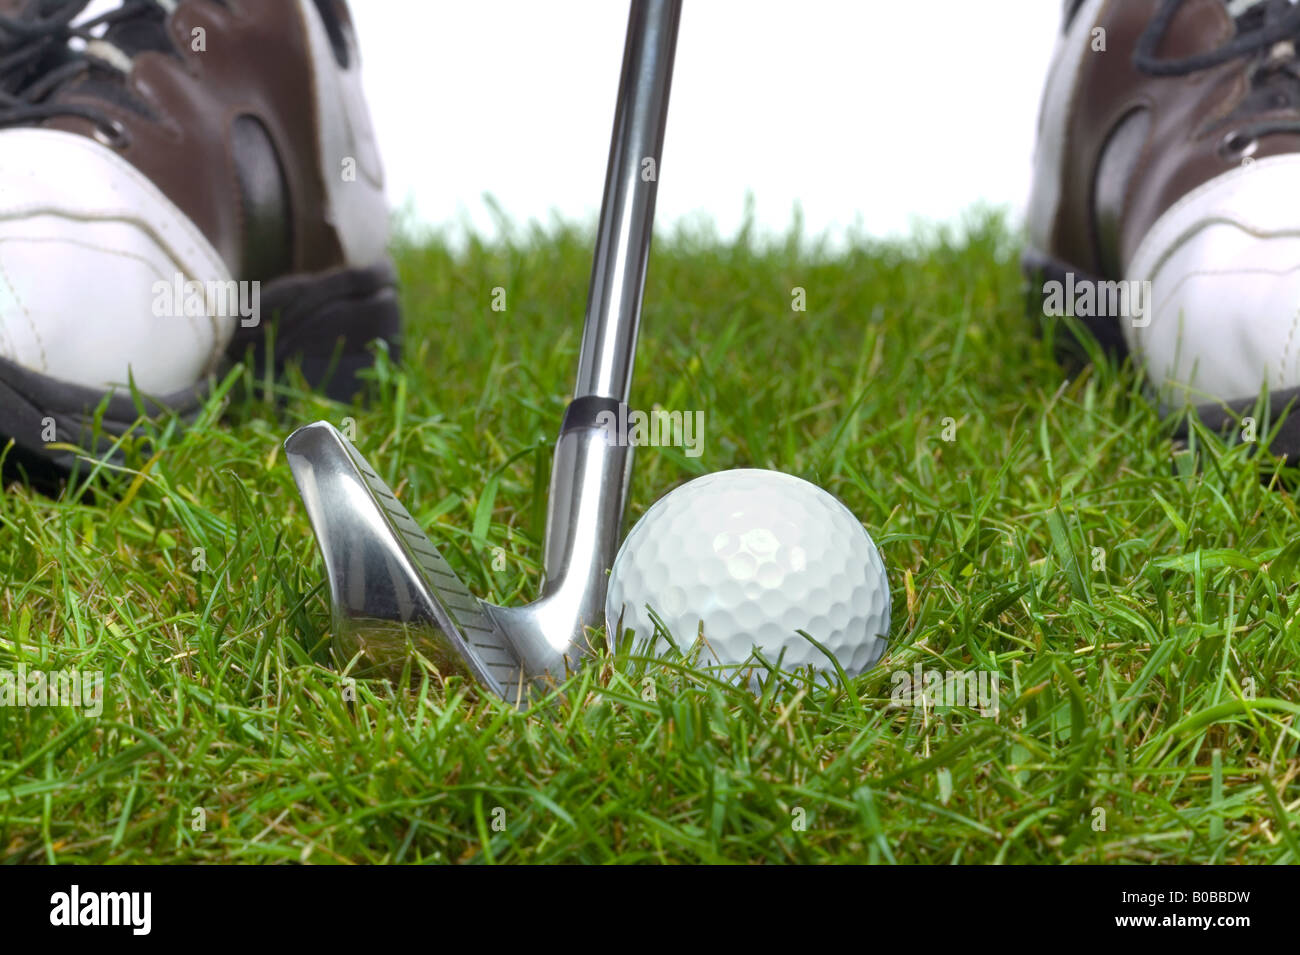 Golf ball in the rough with an iron it behind and the golfers shoes in the background Stock Photo